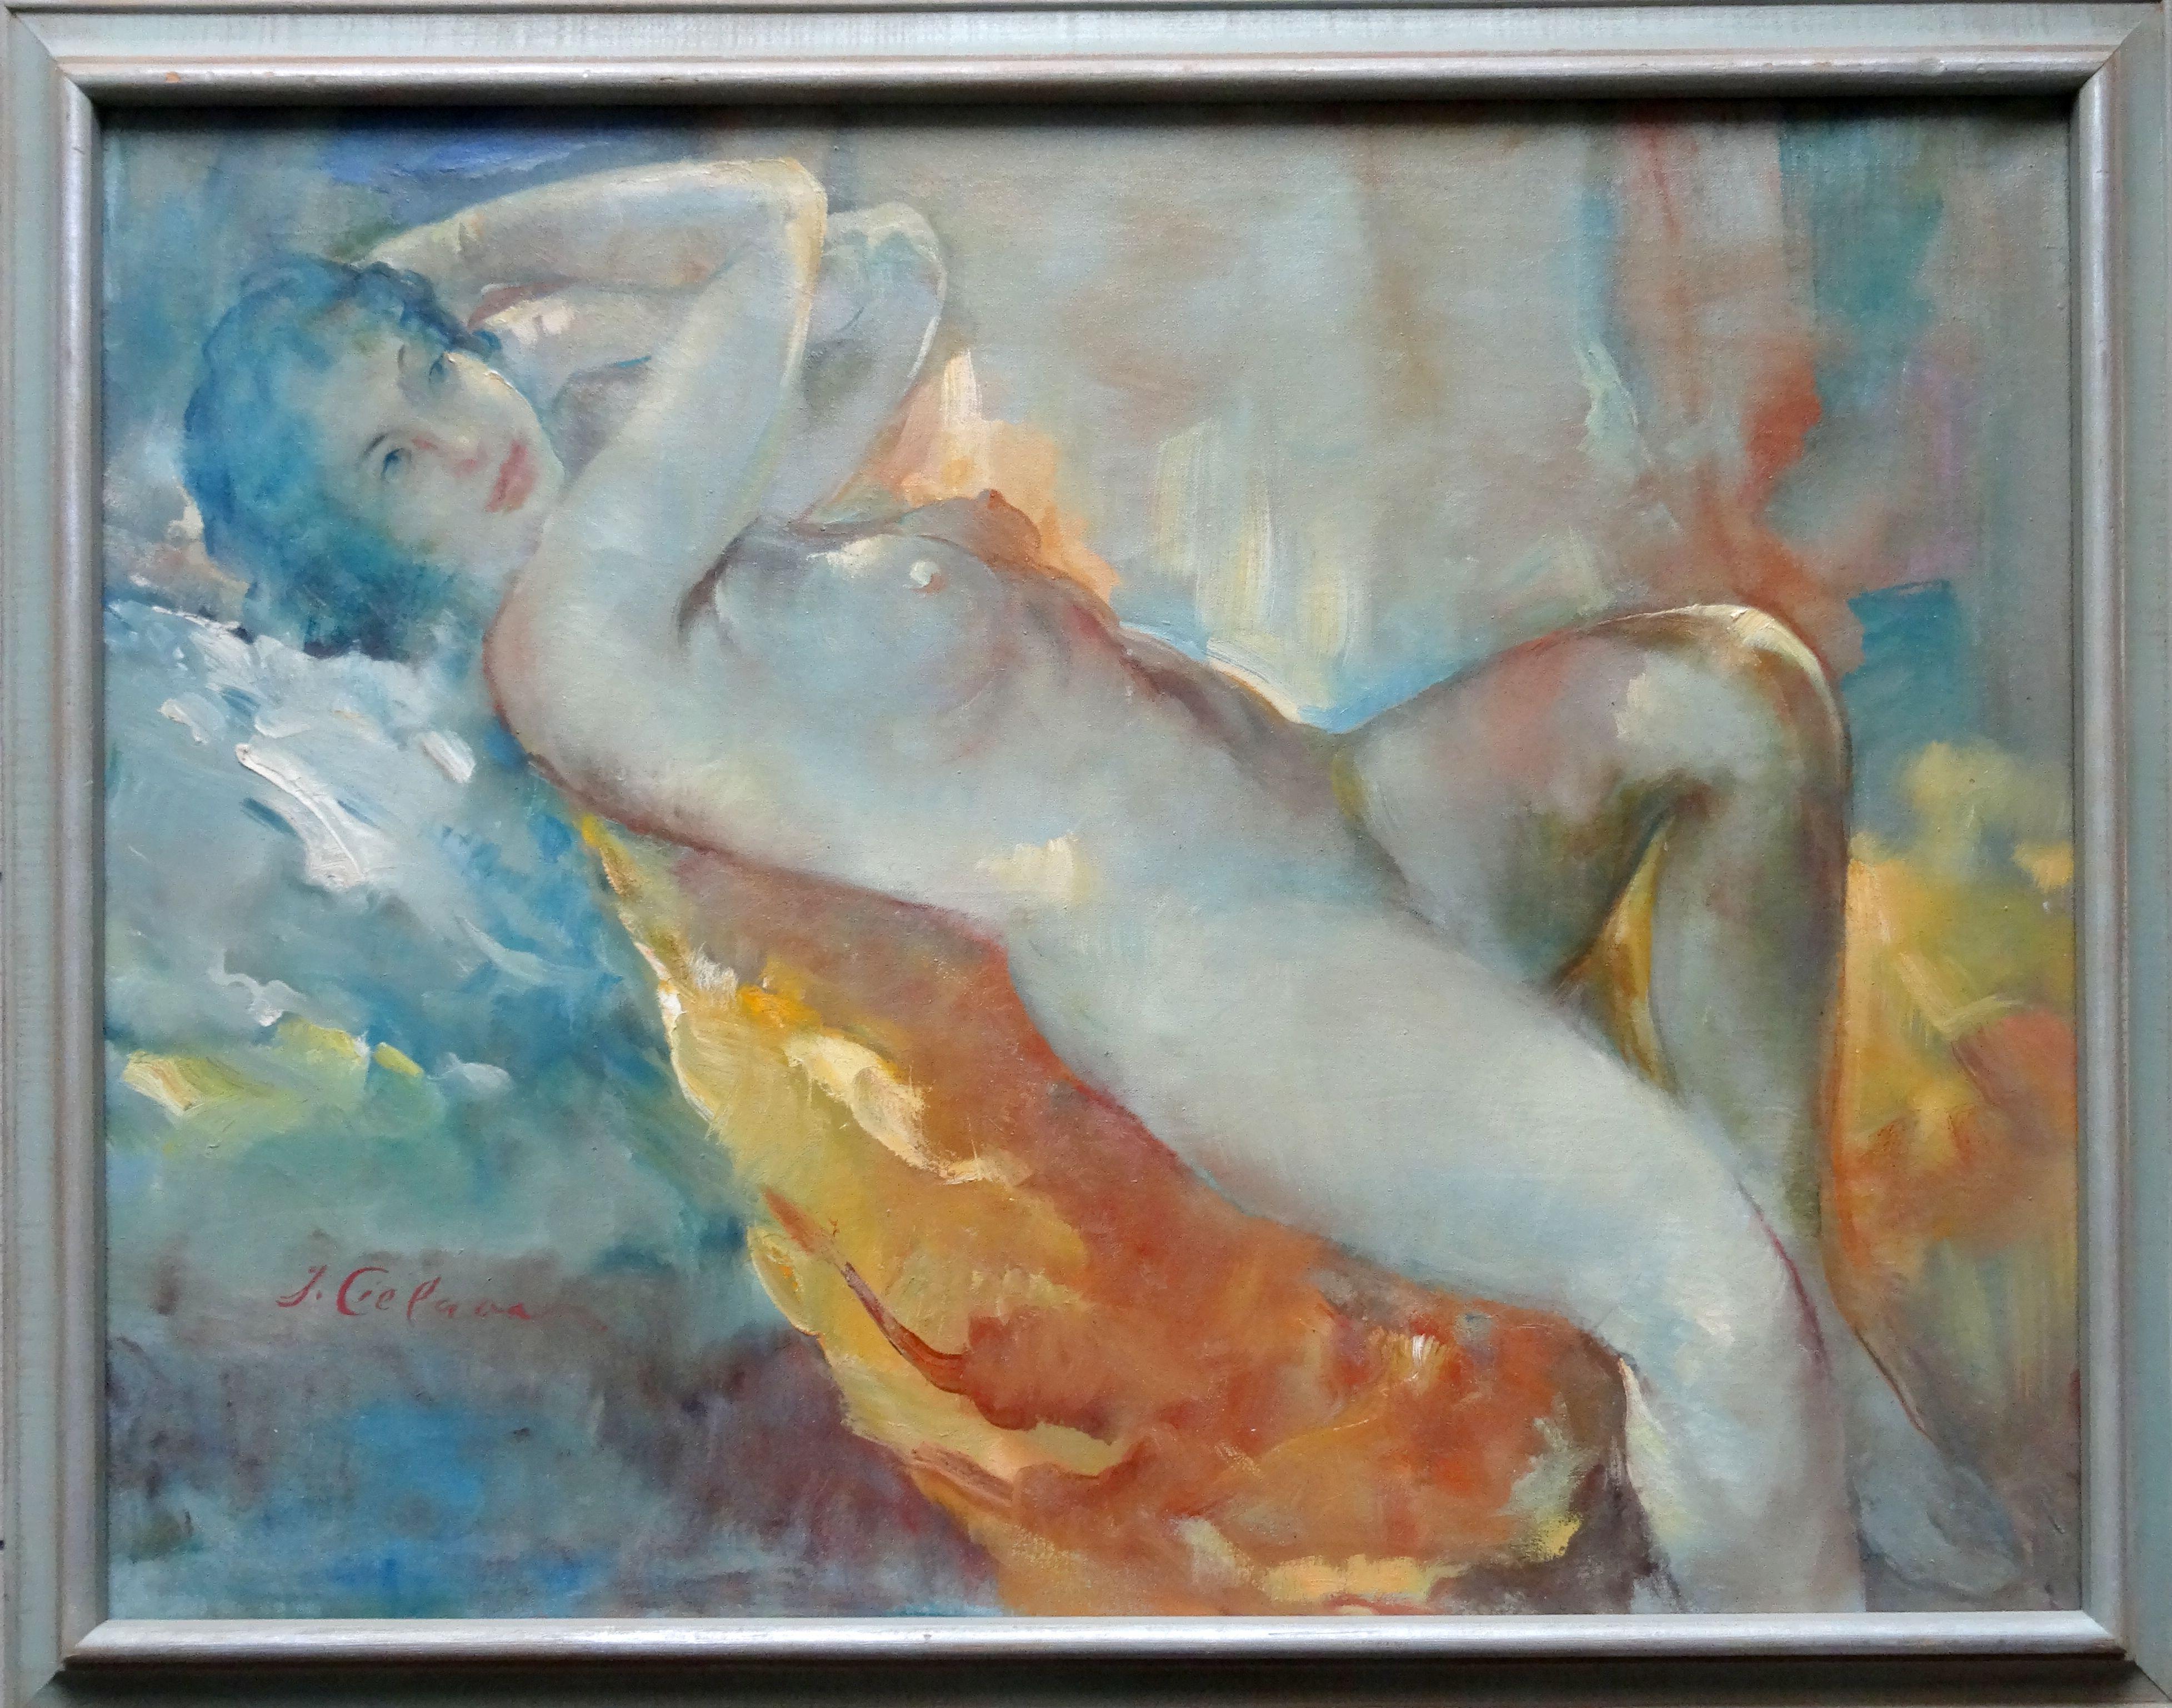 Act. 1978. Canvas, oil, 66x86 cm - Painting by Janis Cielavs